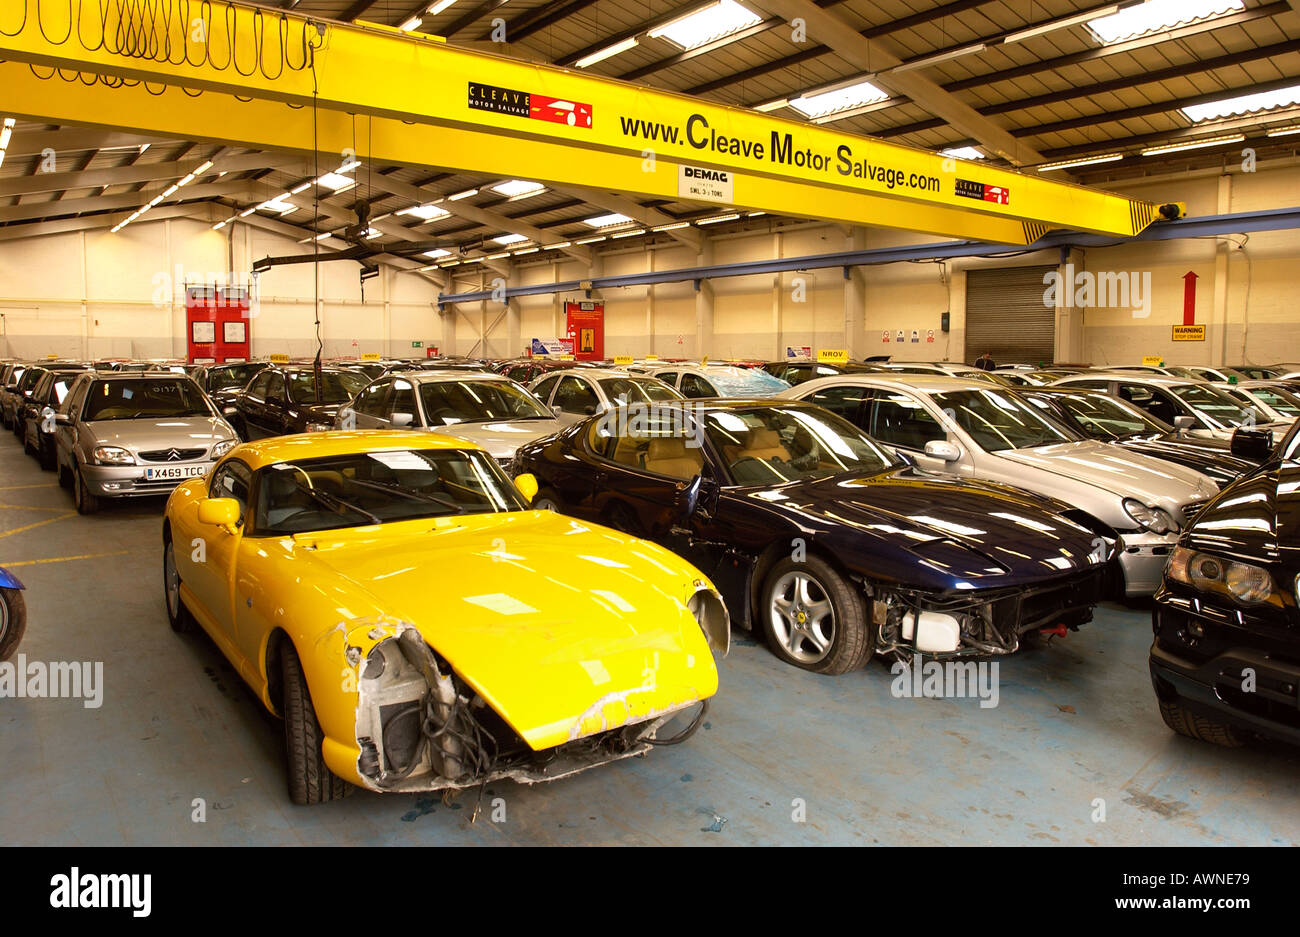 A YELLOW TVR CERBERA AT CLEAVE MOTOR SALVAGE IN GLOUCESTER UK Stock Photo